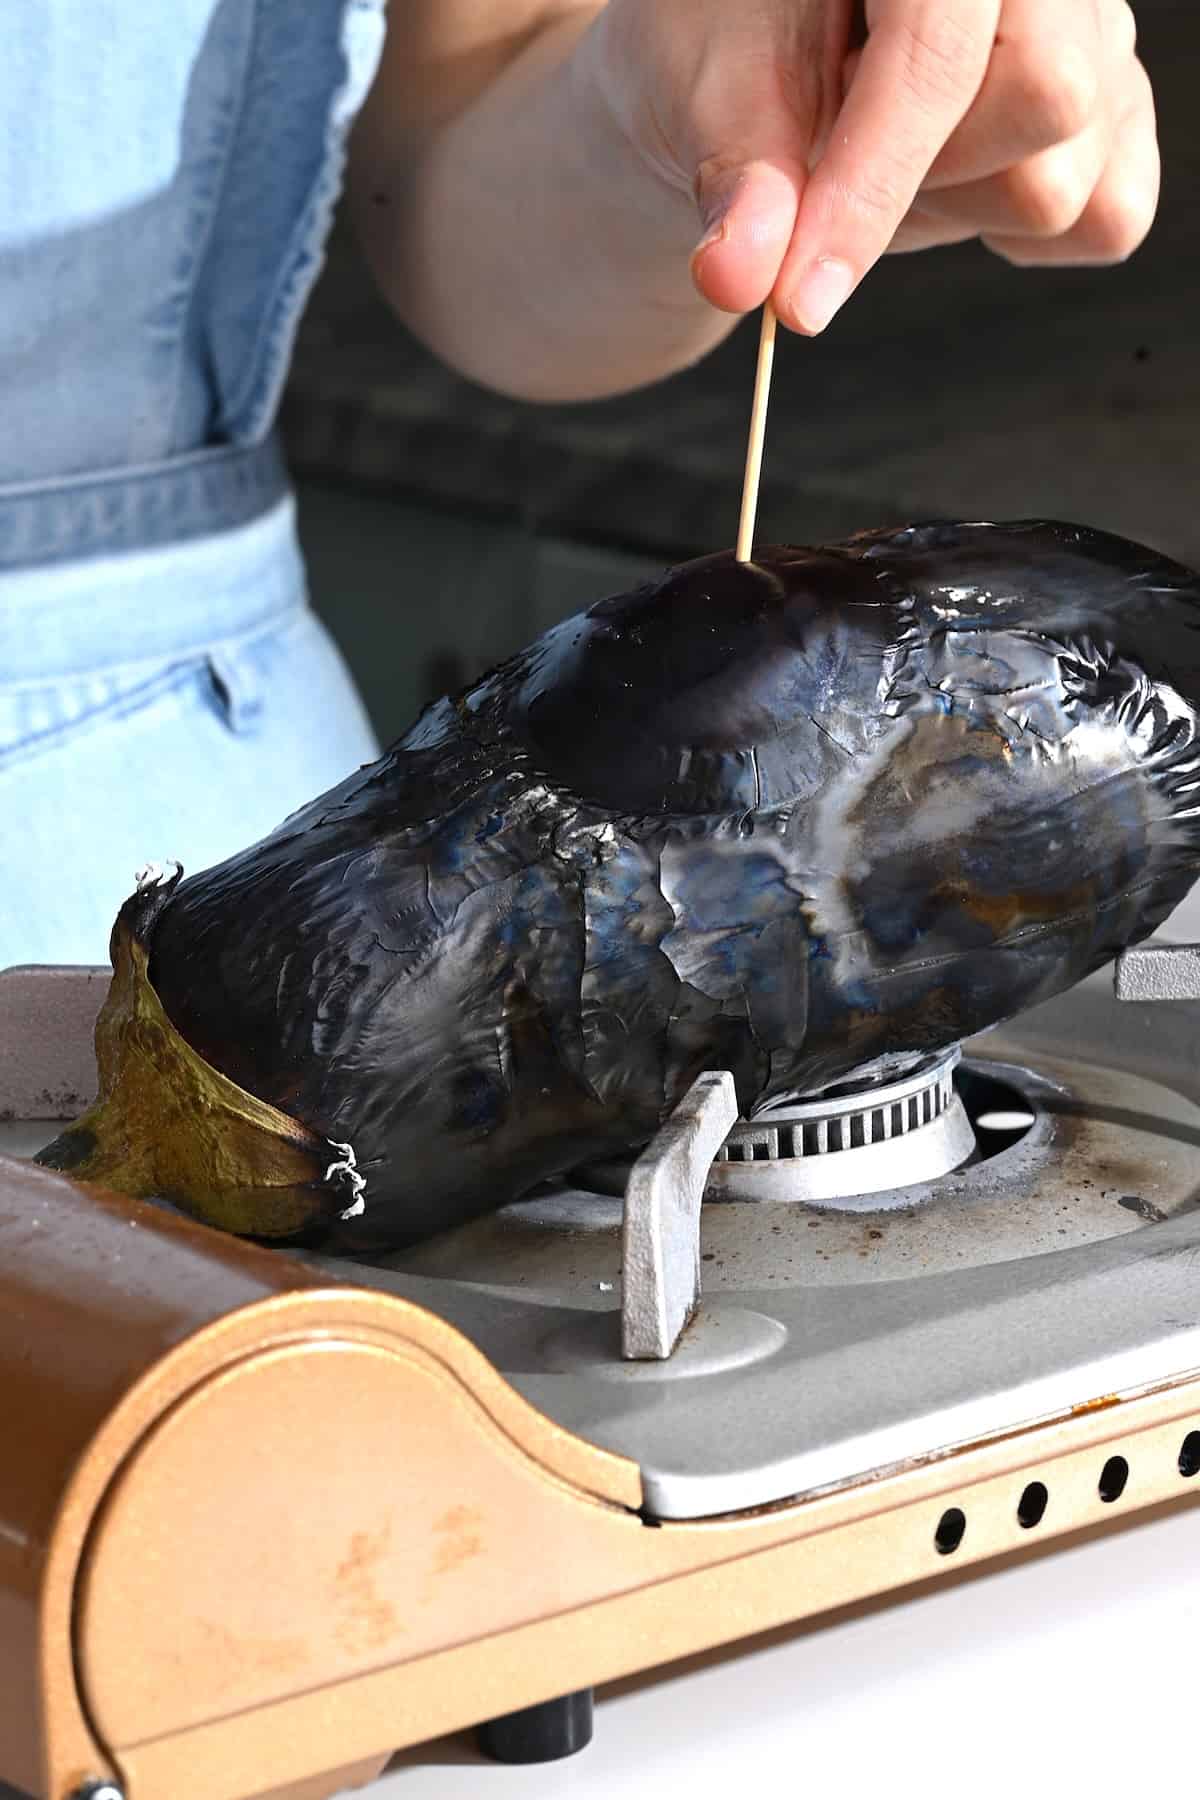 Charring an eggplant over open flame